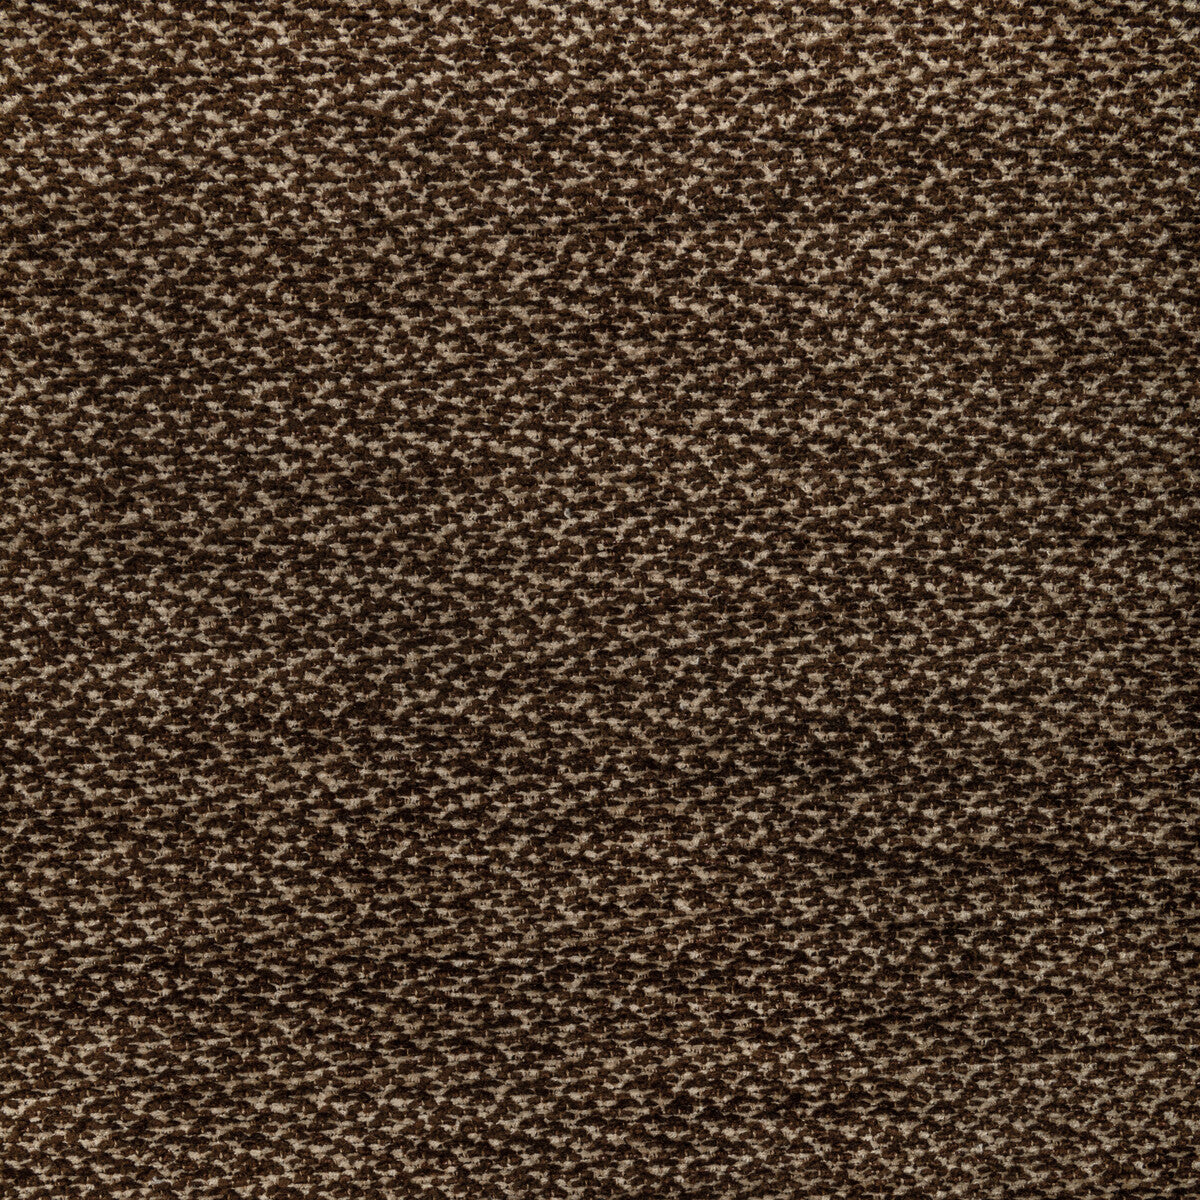 Sasson Texture fabric in sable color - pattern 8022122.1616.0 - by Brunschwig &amp; Fils in the Chambery Textures III collection